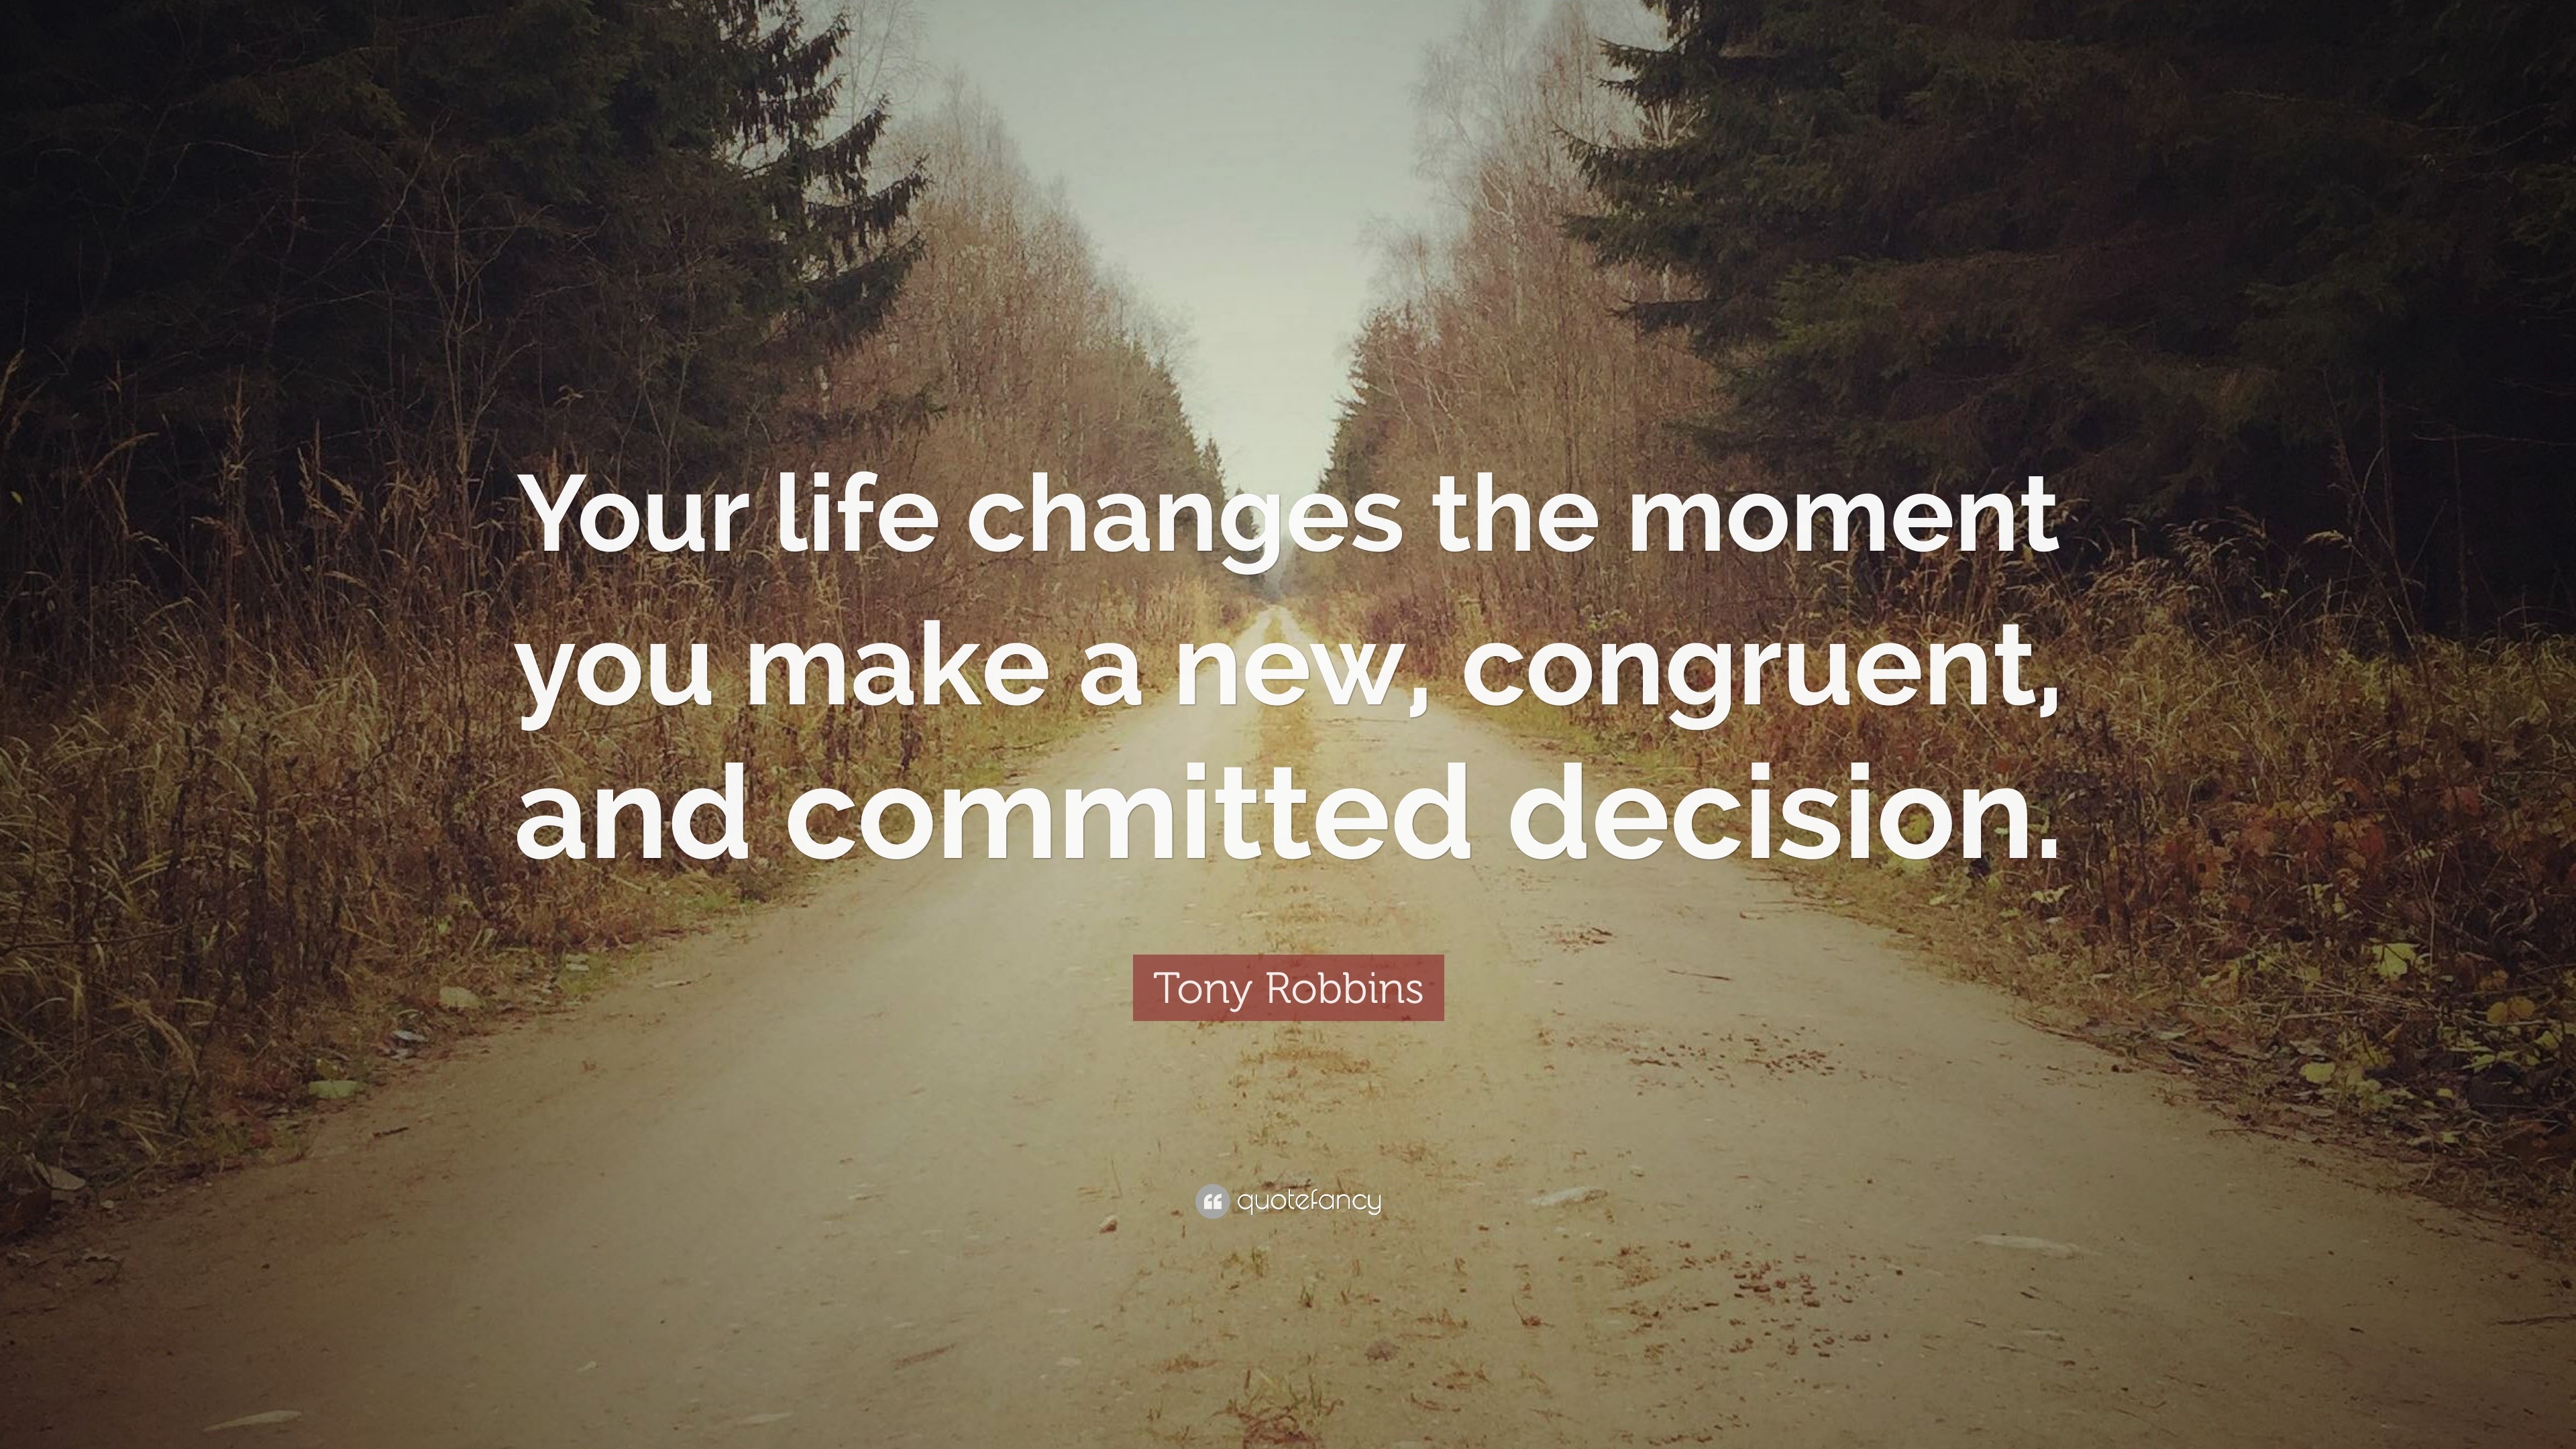 Tony Robbins Quote: “Your life changes the moment you make a new ...